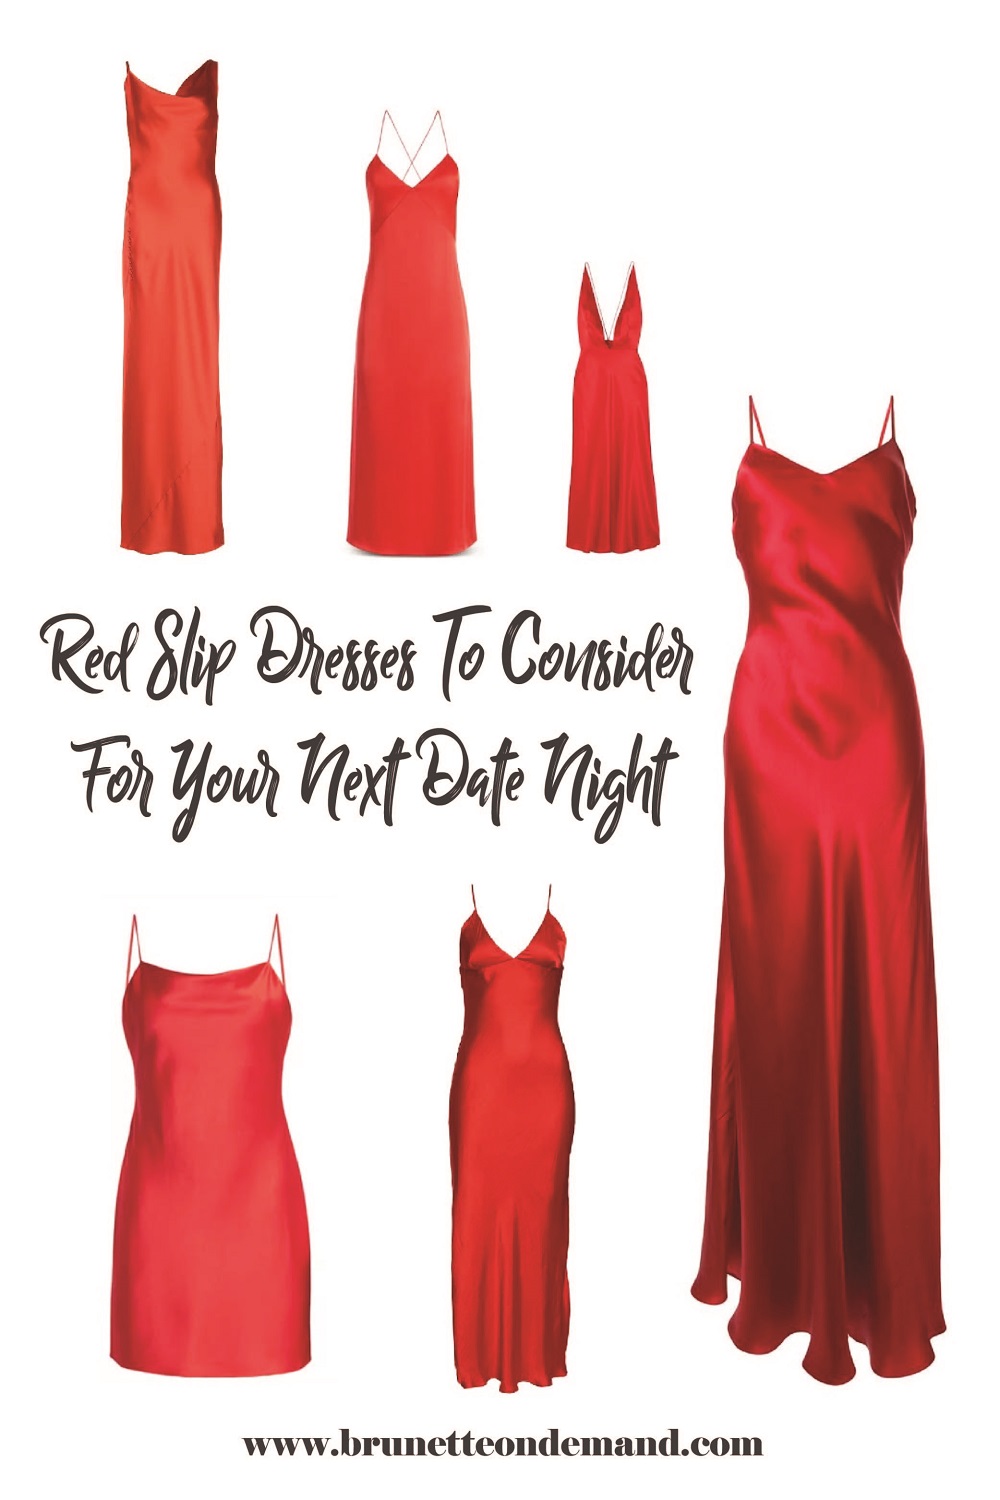 8 Red Slip Dresses To Consider For Your Next Date Night